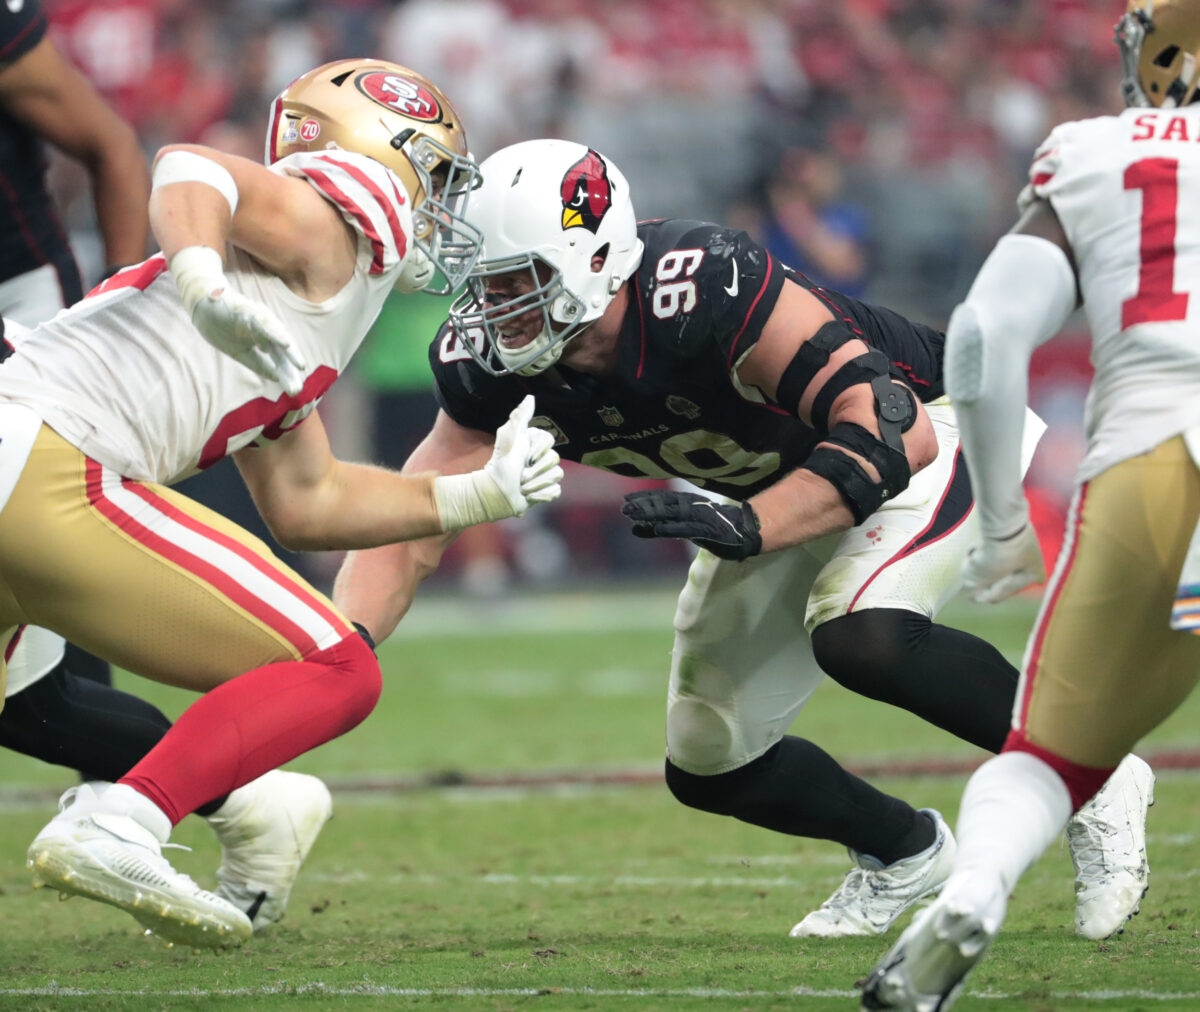 J.J. Watt expected to play with limited snaps vs. Raiders